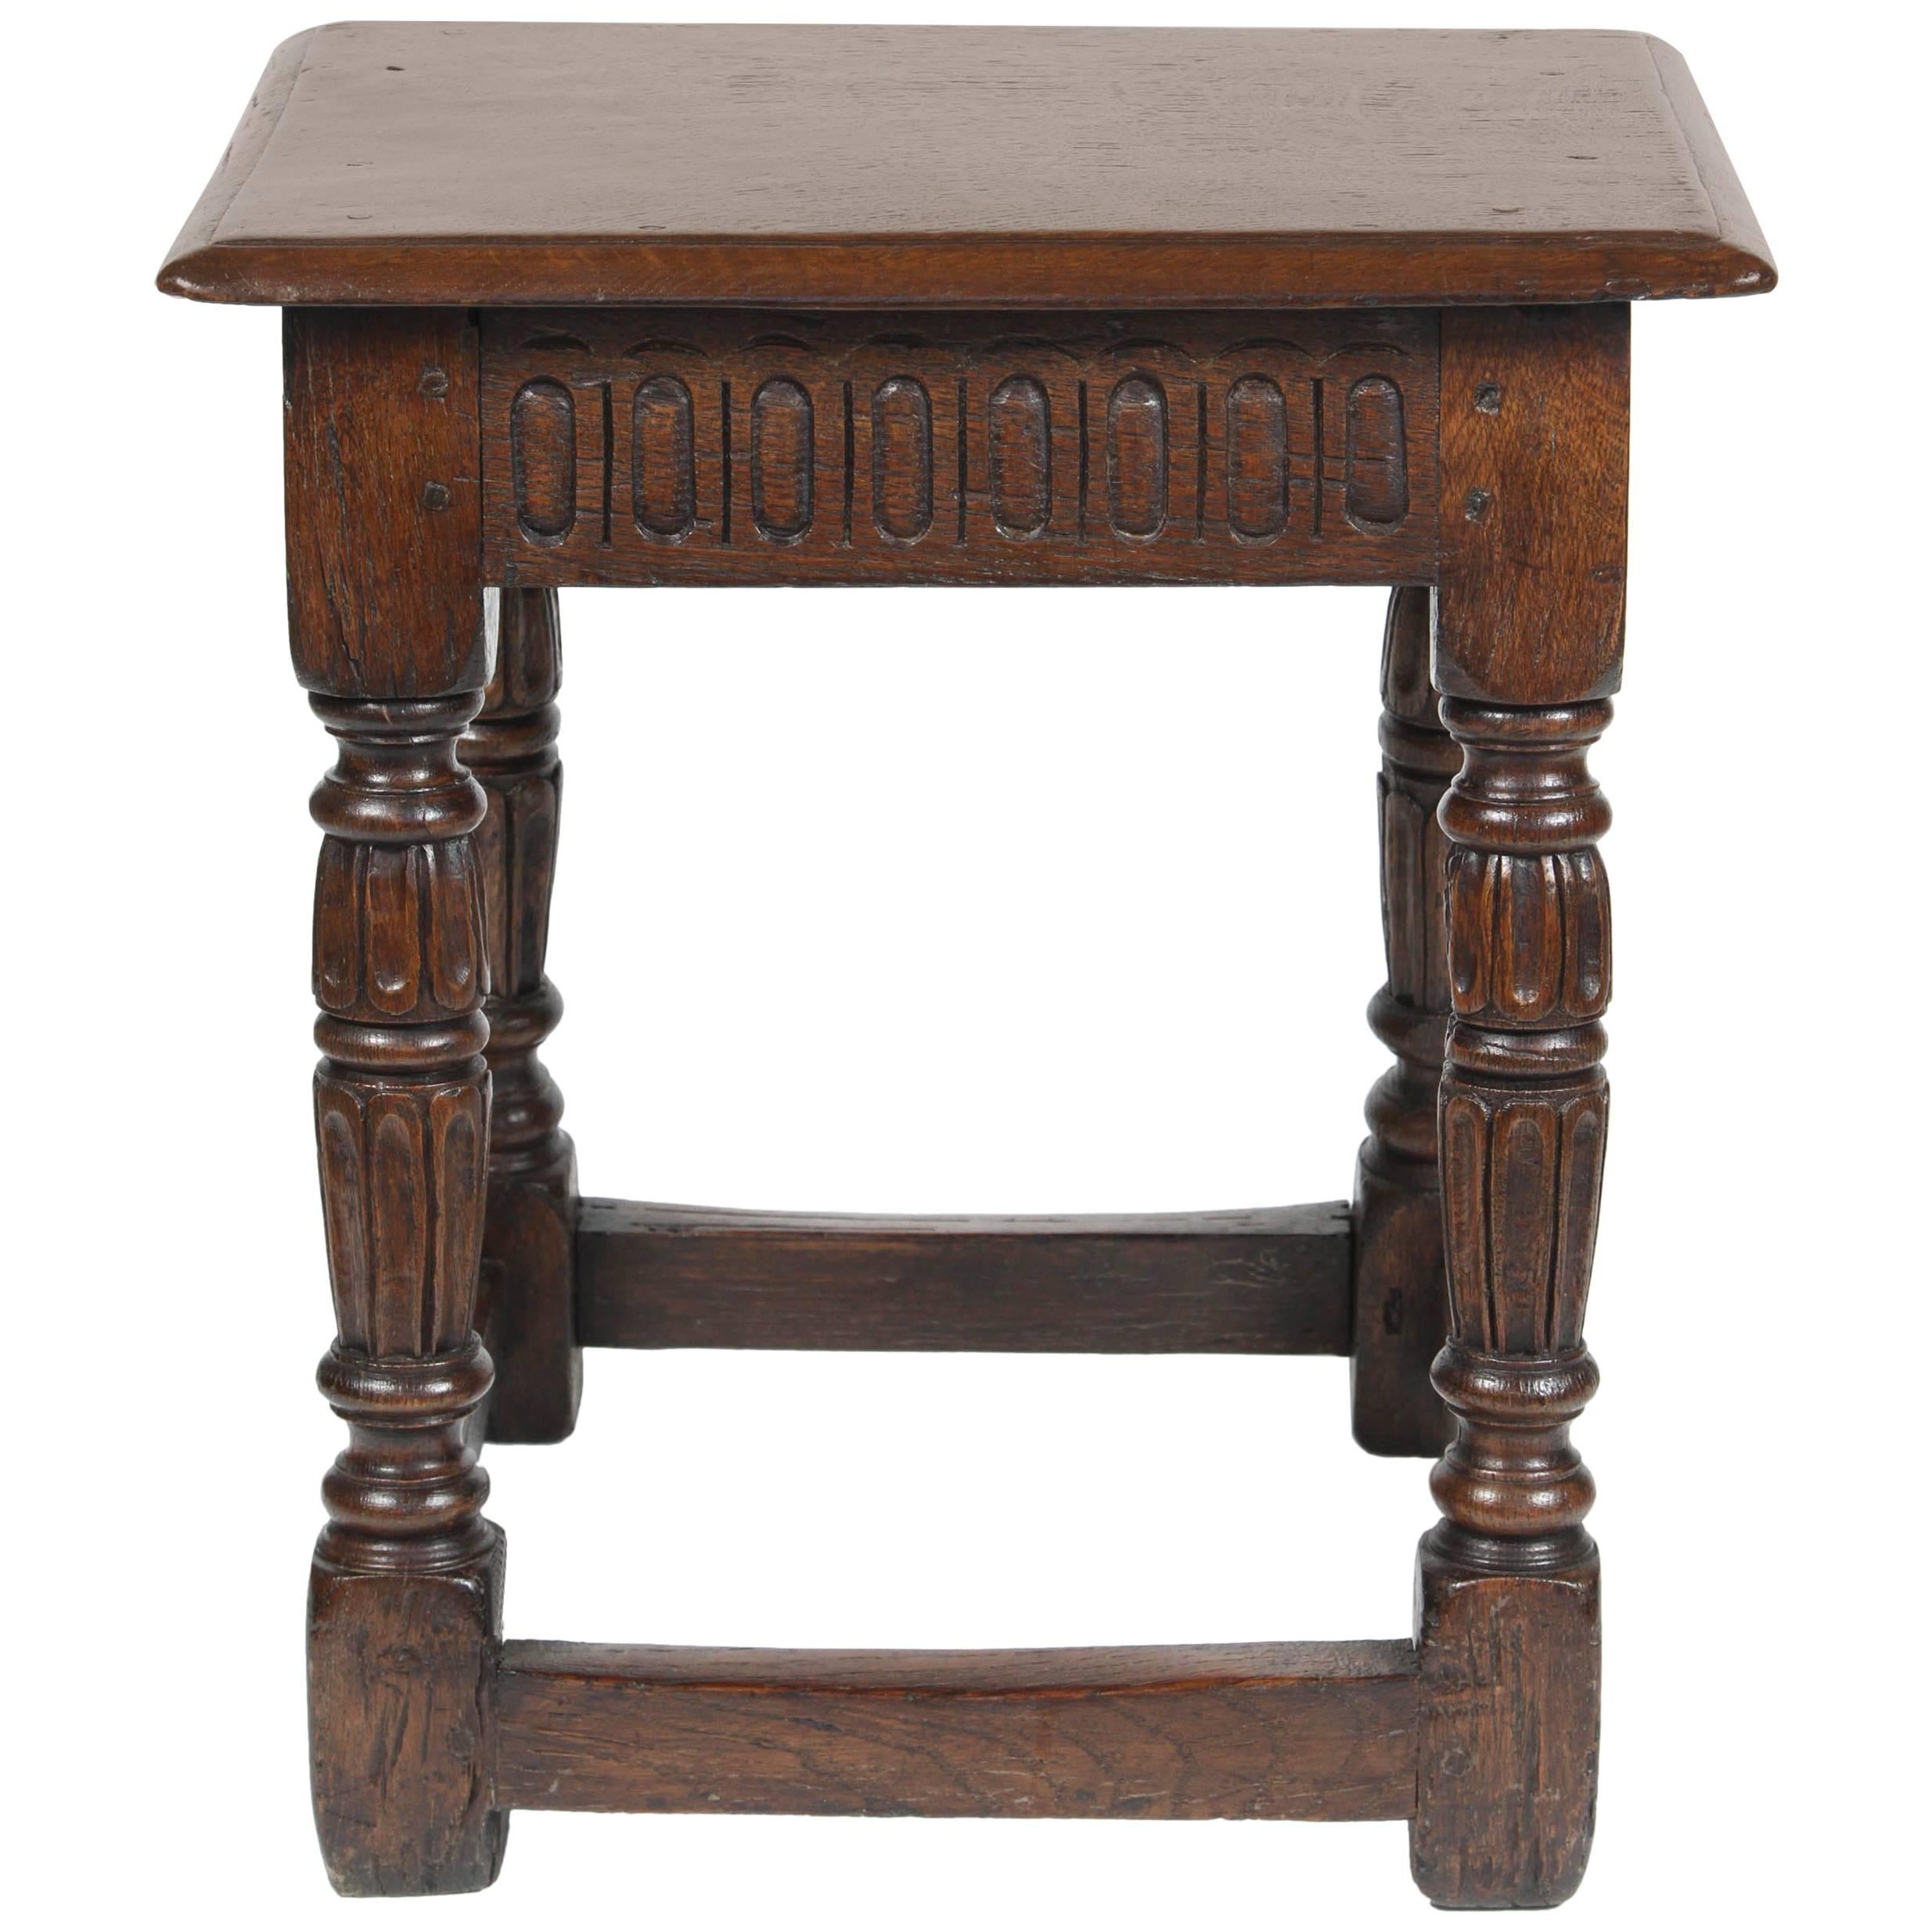 Early 17th Century English Joint Stool